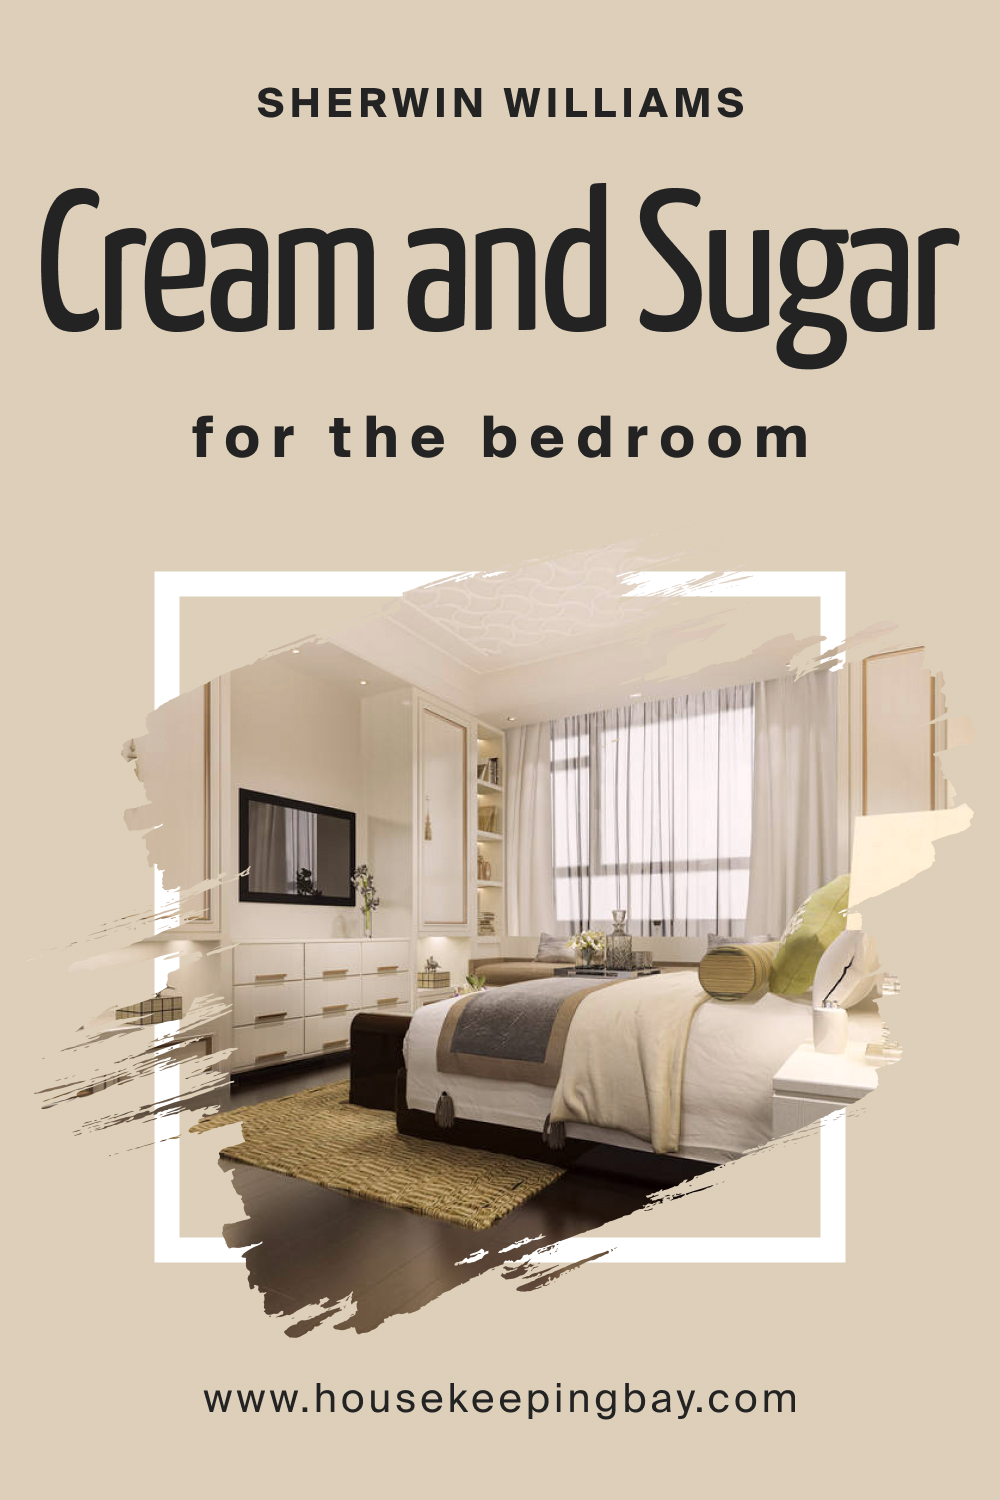 Sherwin Williams. SW 9507 Cream and Sugar For the bedroom